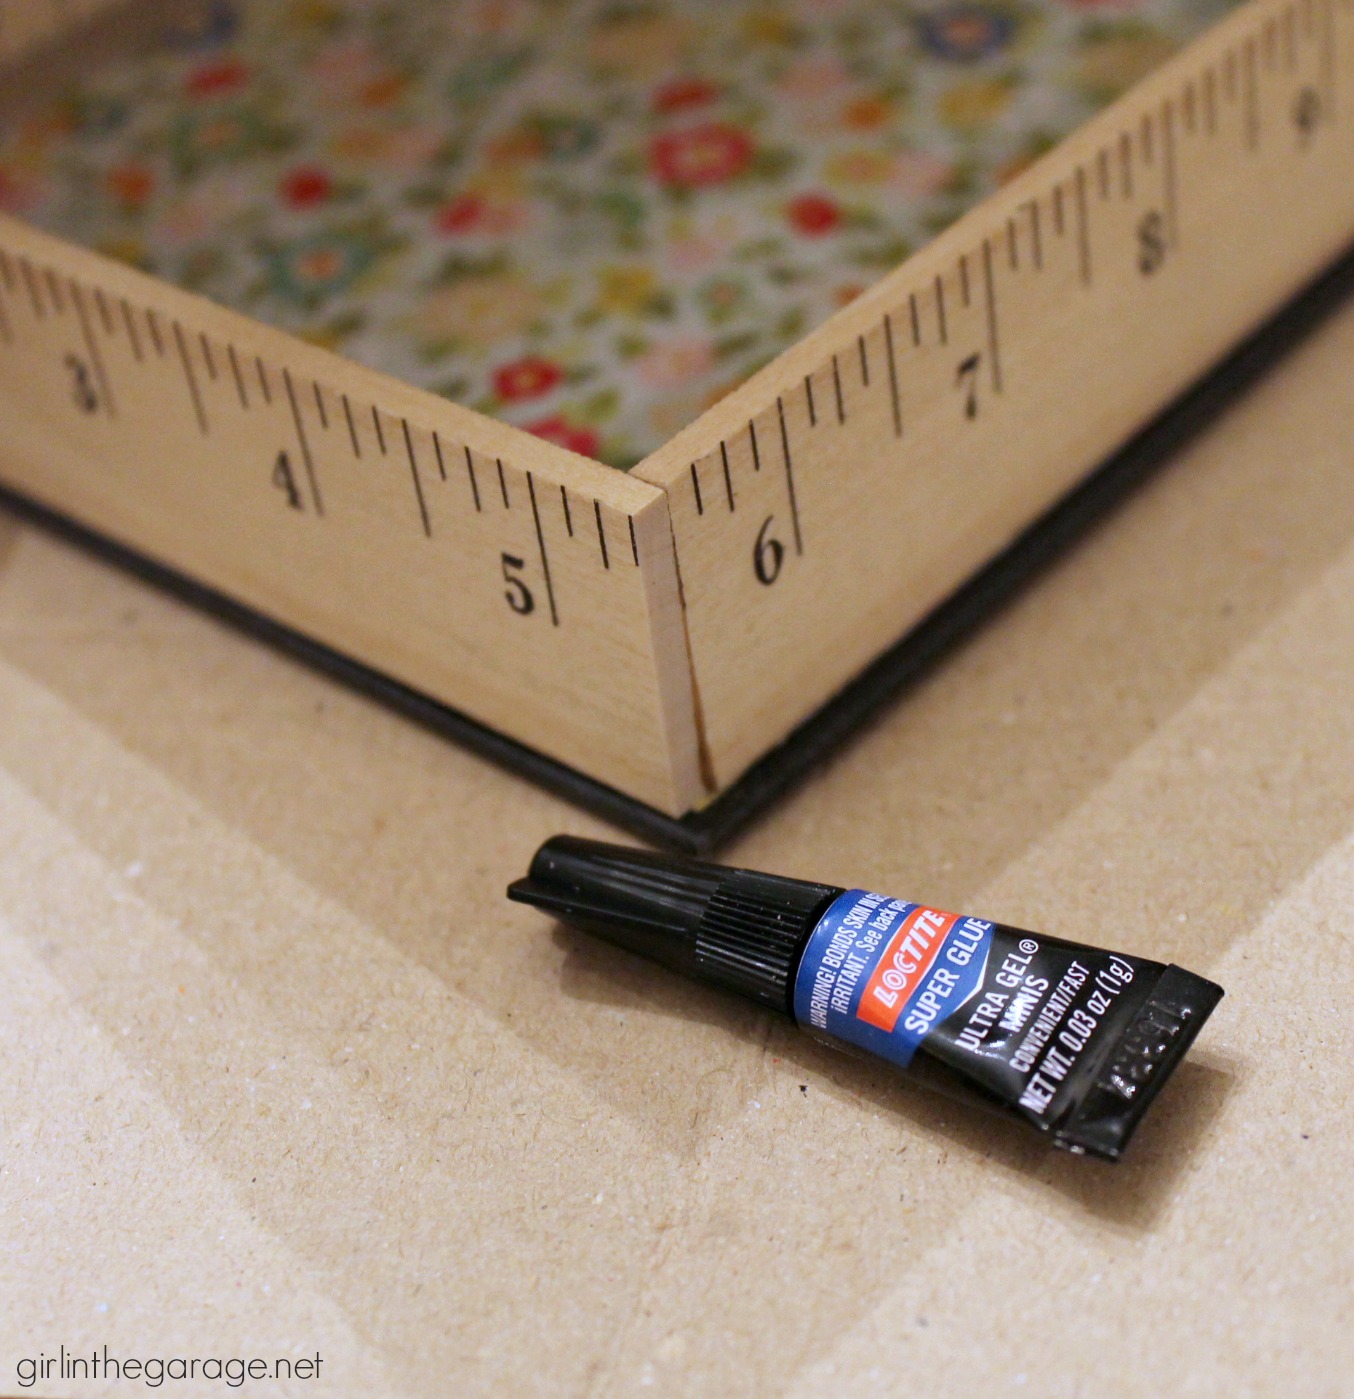 Repurposed book cover into a storage box- tutorial by Girl in the Garage